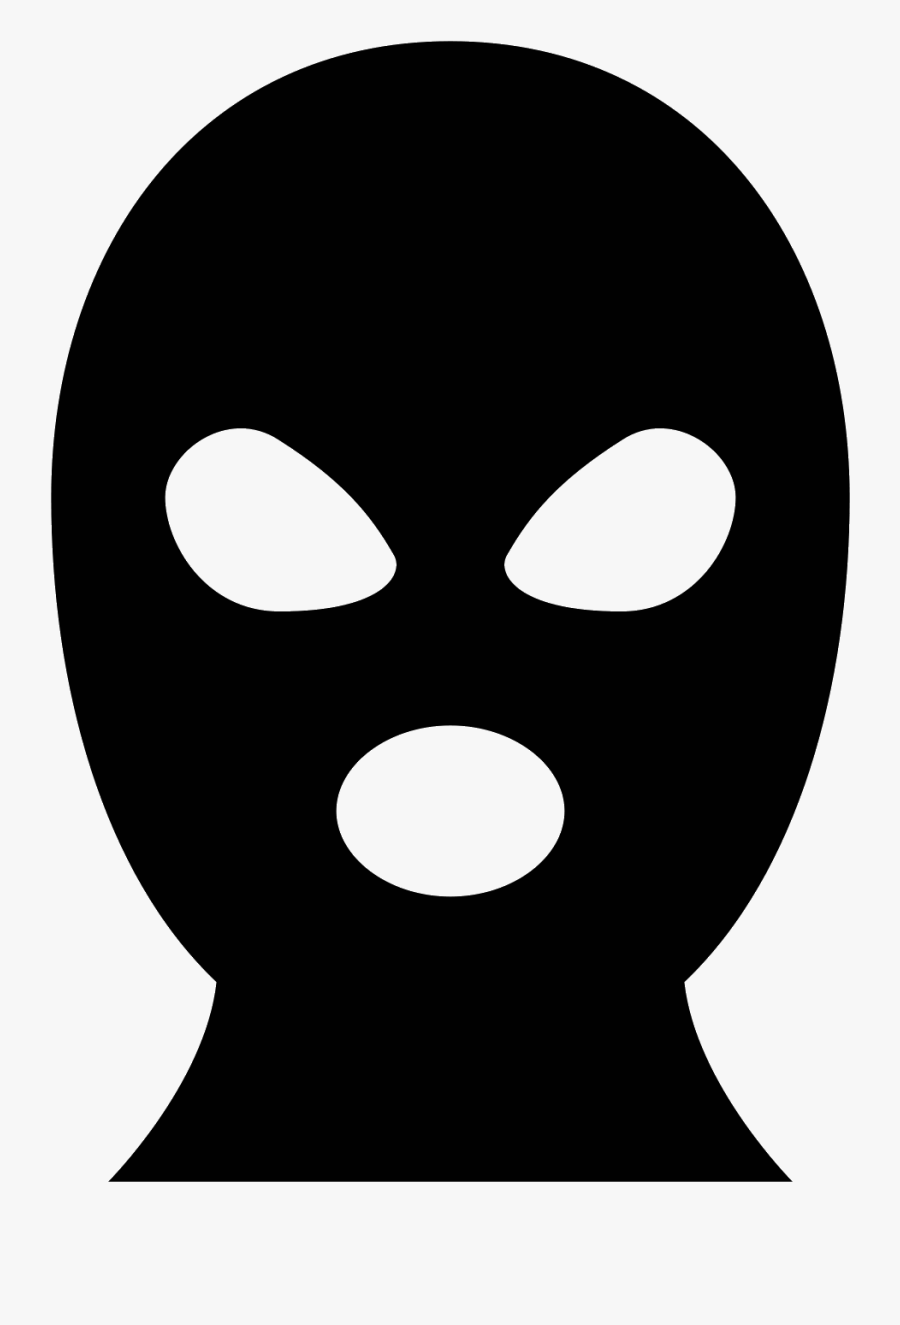 Clip Art Collection Of Free Svg - Ski Mask Icon , Free Transparent ...